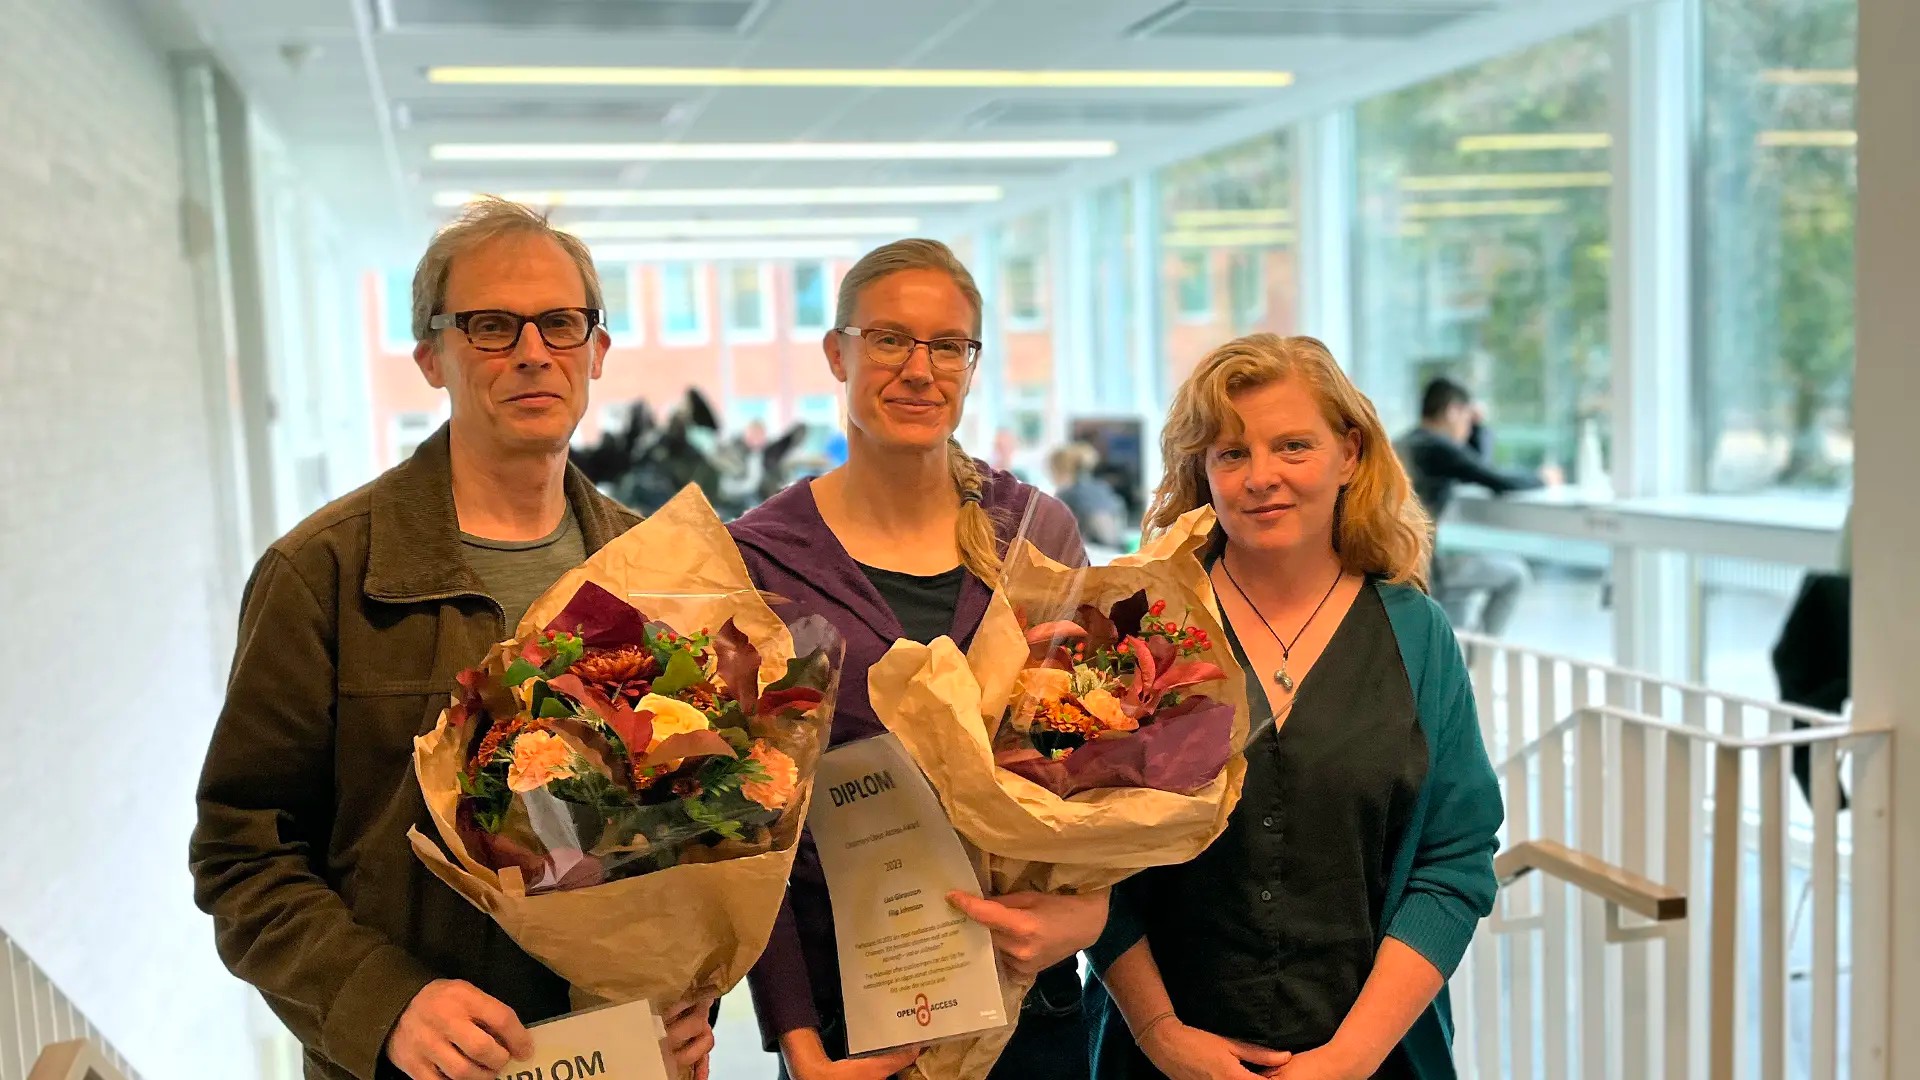 Jessica Lindholm, Filip Johnsson and Lisa Göransson in the Chalmers library